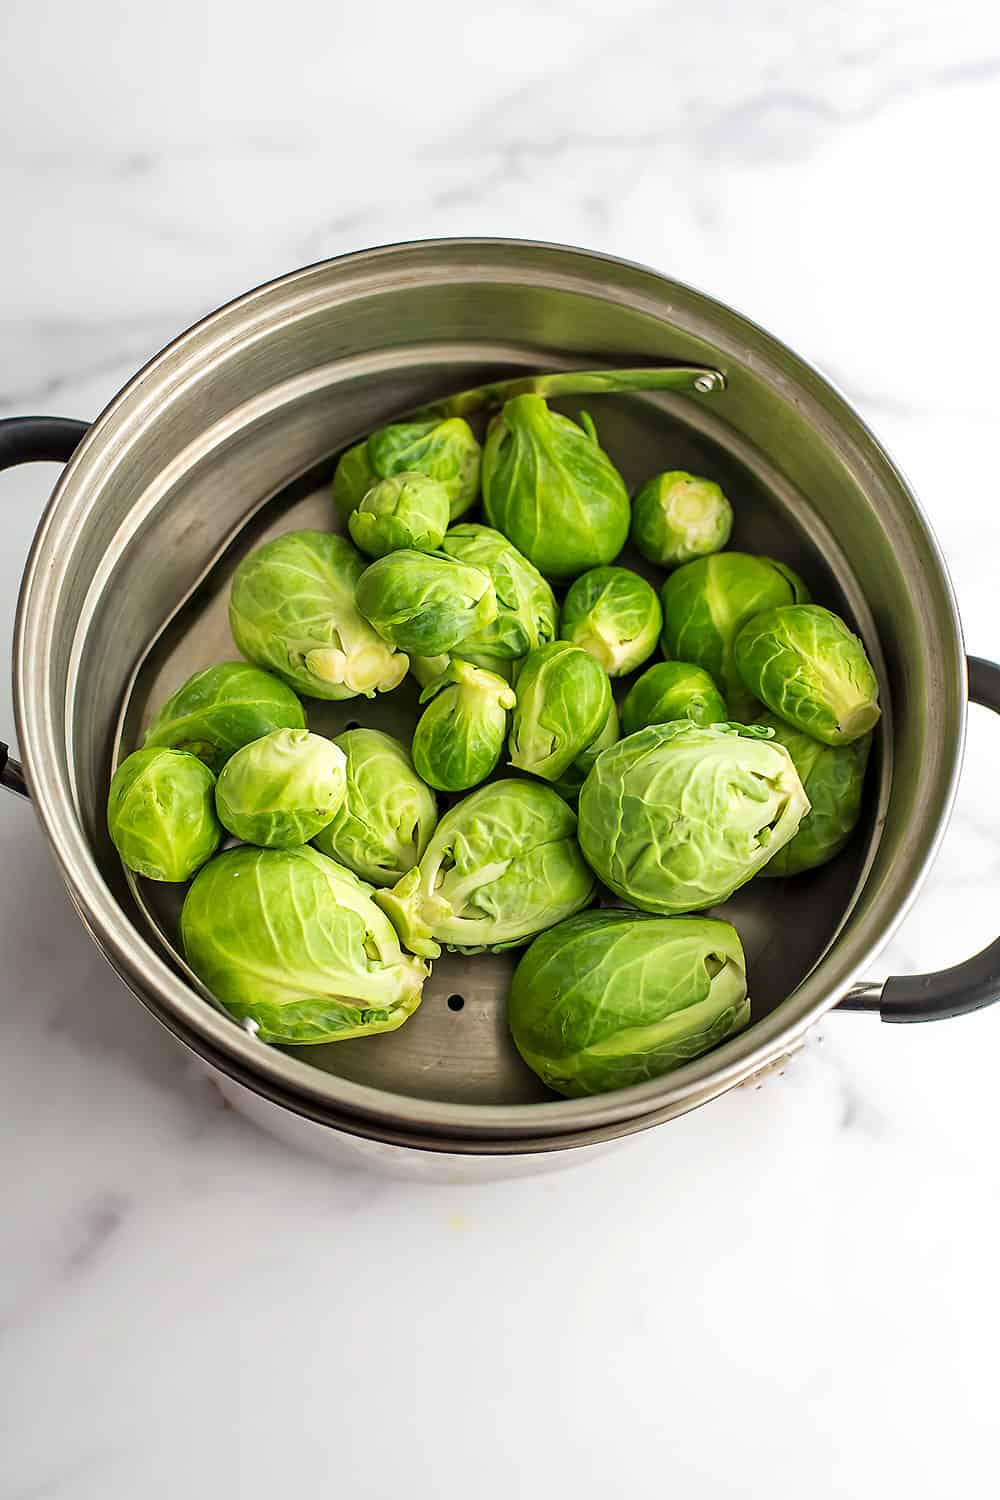 Brussel sprouts in steamer basket before steaming.